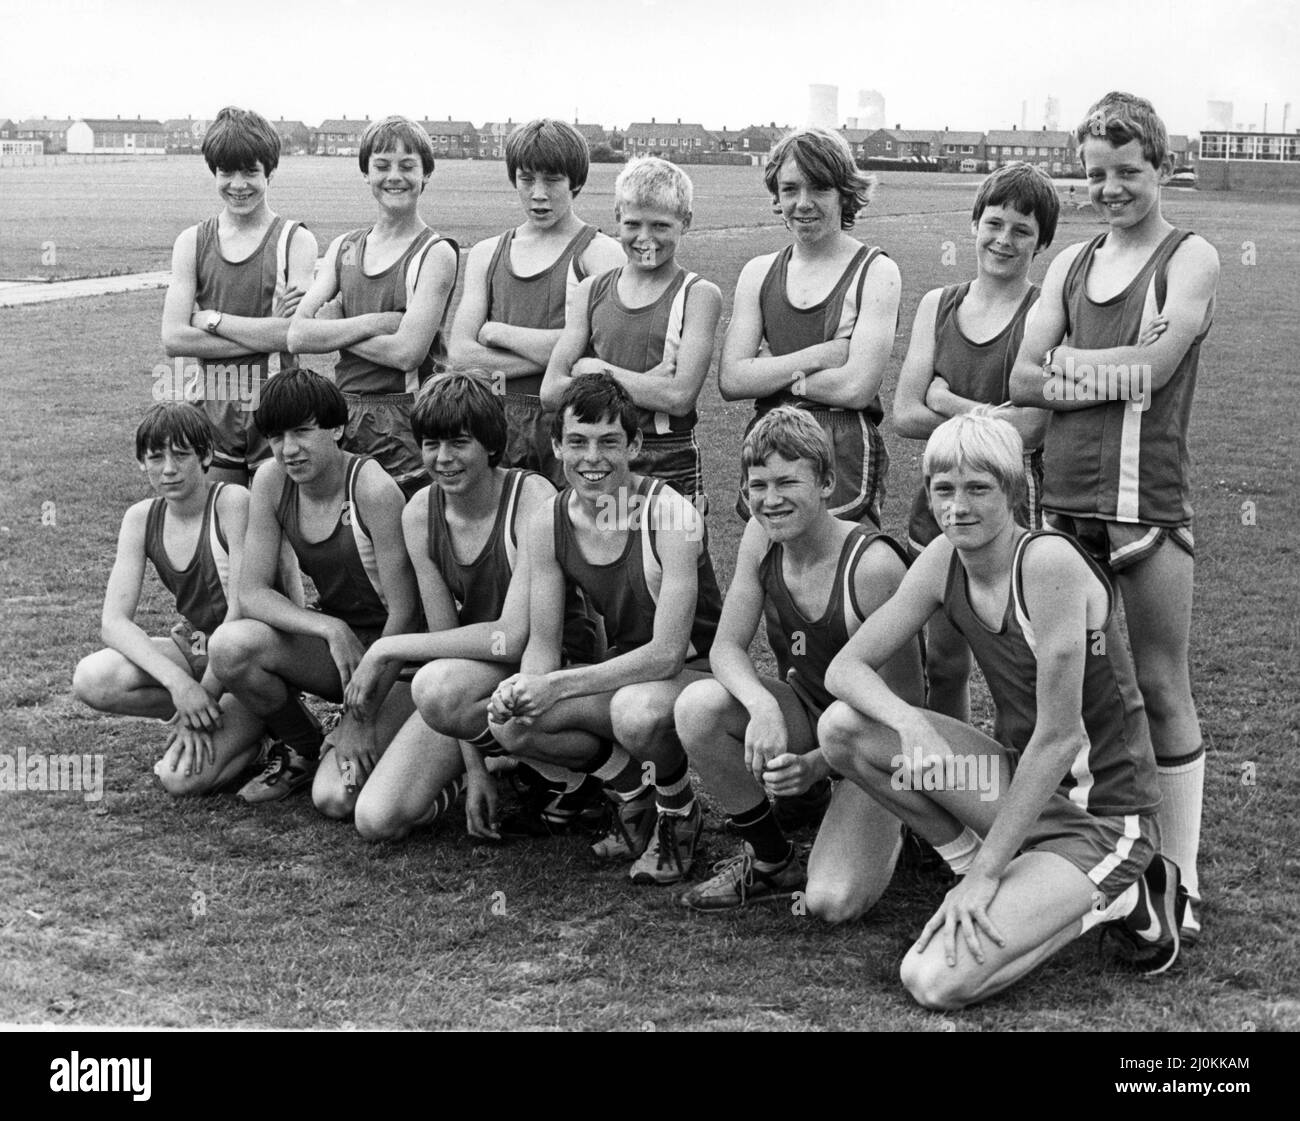 Brunner Comprehensive School, Billingham's second years boys' athletics team which is competing in the finals of the English Schools' Cup at Crewe tomorrow. BAck row from left; Gary Pearson, David Ollett, Gary Willis, Paul Garrett, Darren Whiteley, Andrew Day, Darren Cass. Front row: Tony Bowe, Peter Cass, Paul Beall, Norman Shute (captain), Philip Owens and David Cole. Also in the team but away when picture was taken is Michael Armstrong. 14th July 1982. Stock Photo